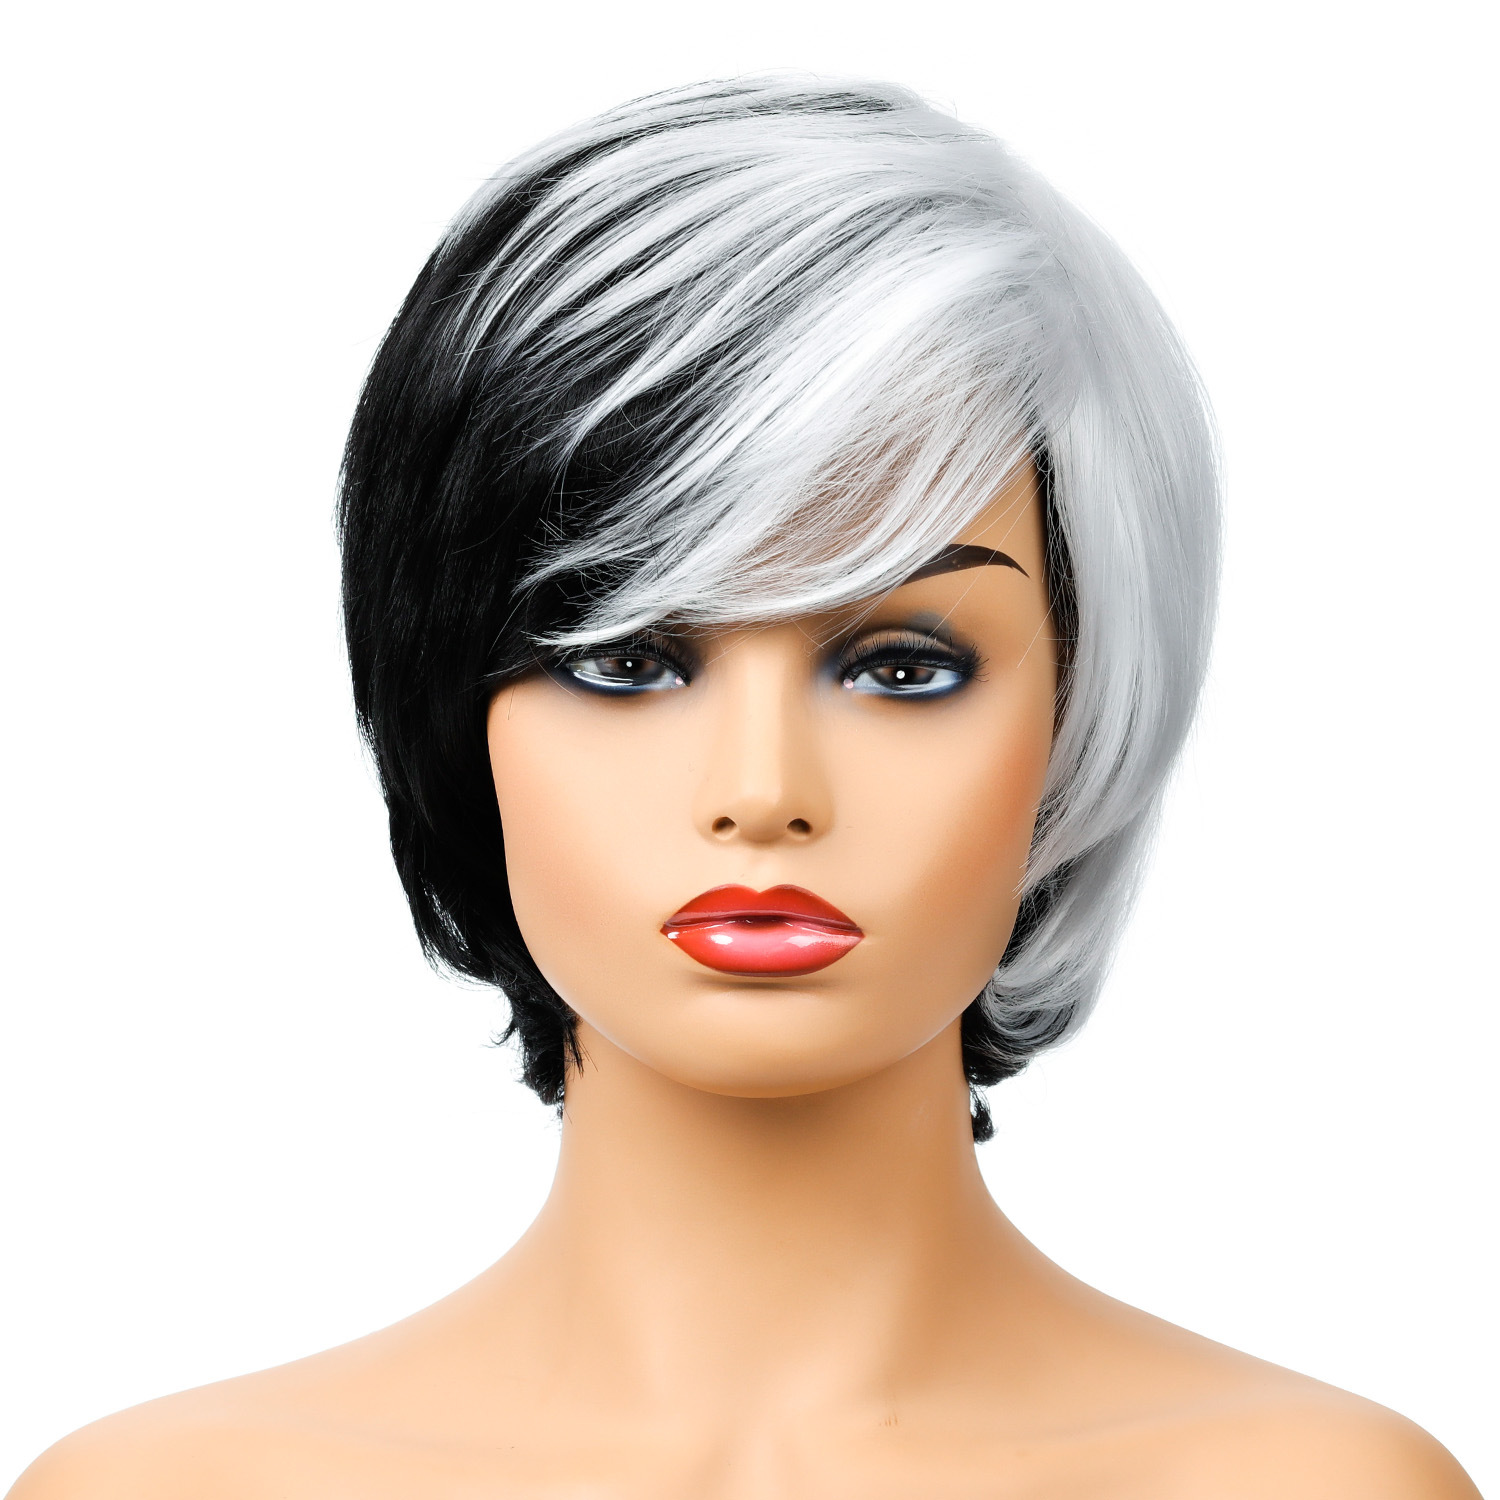 Image of a synthetic wig with black and white short hair, designed for fashionable women